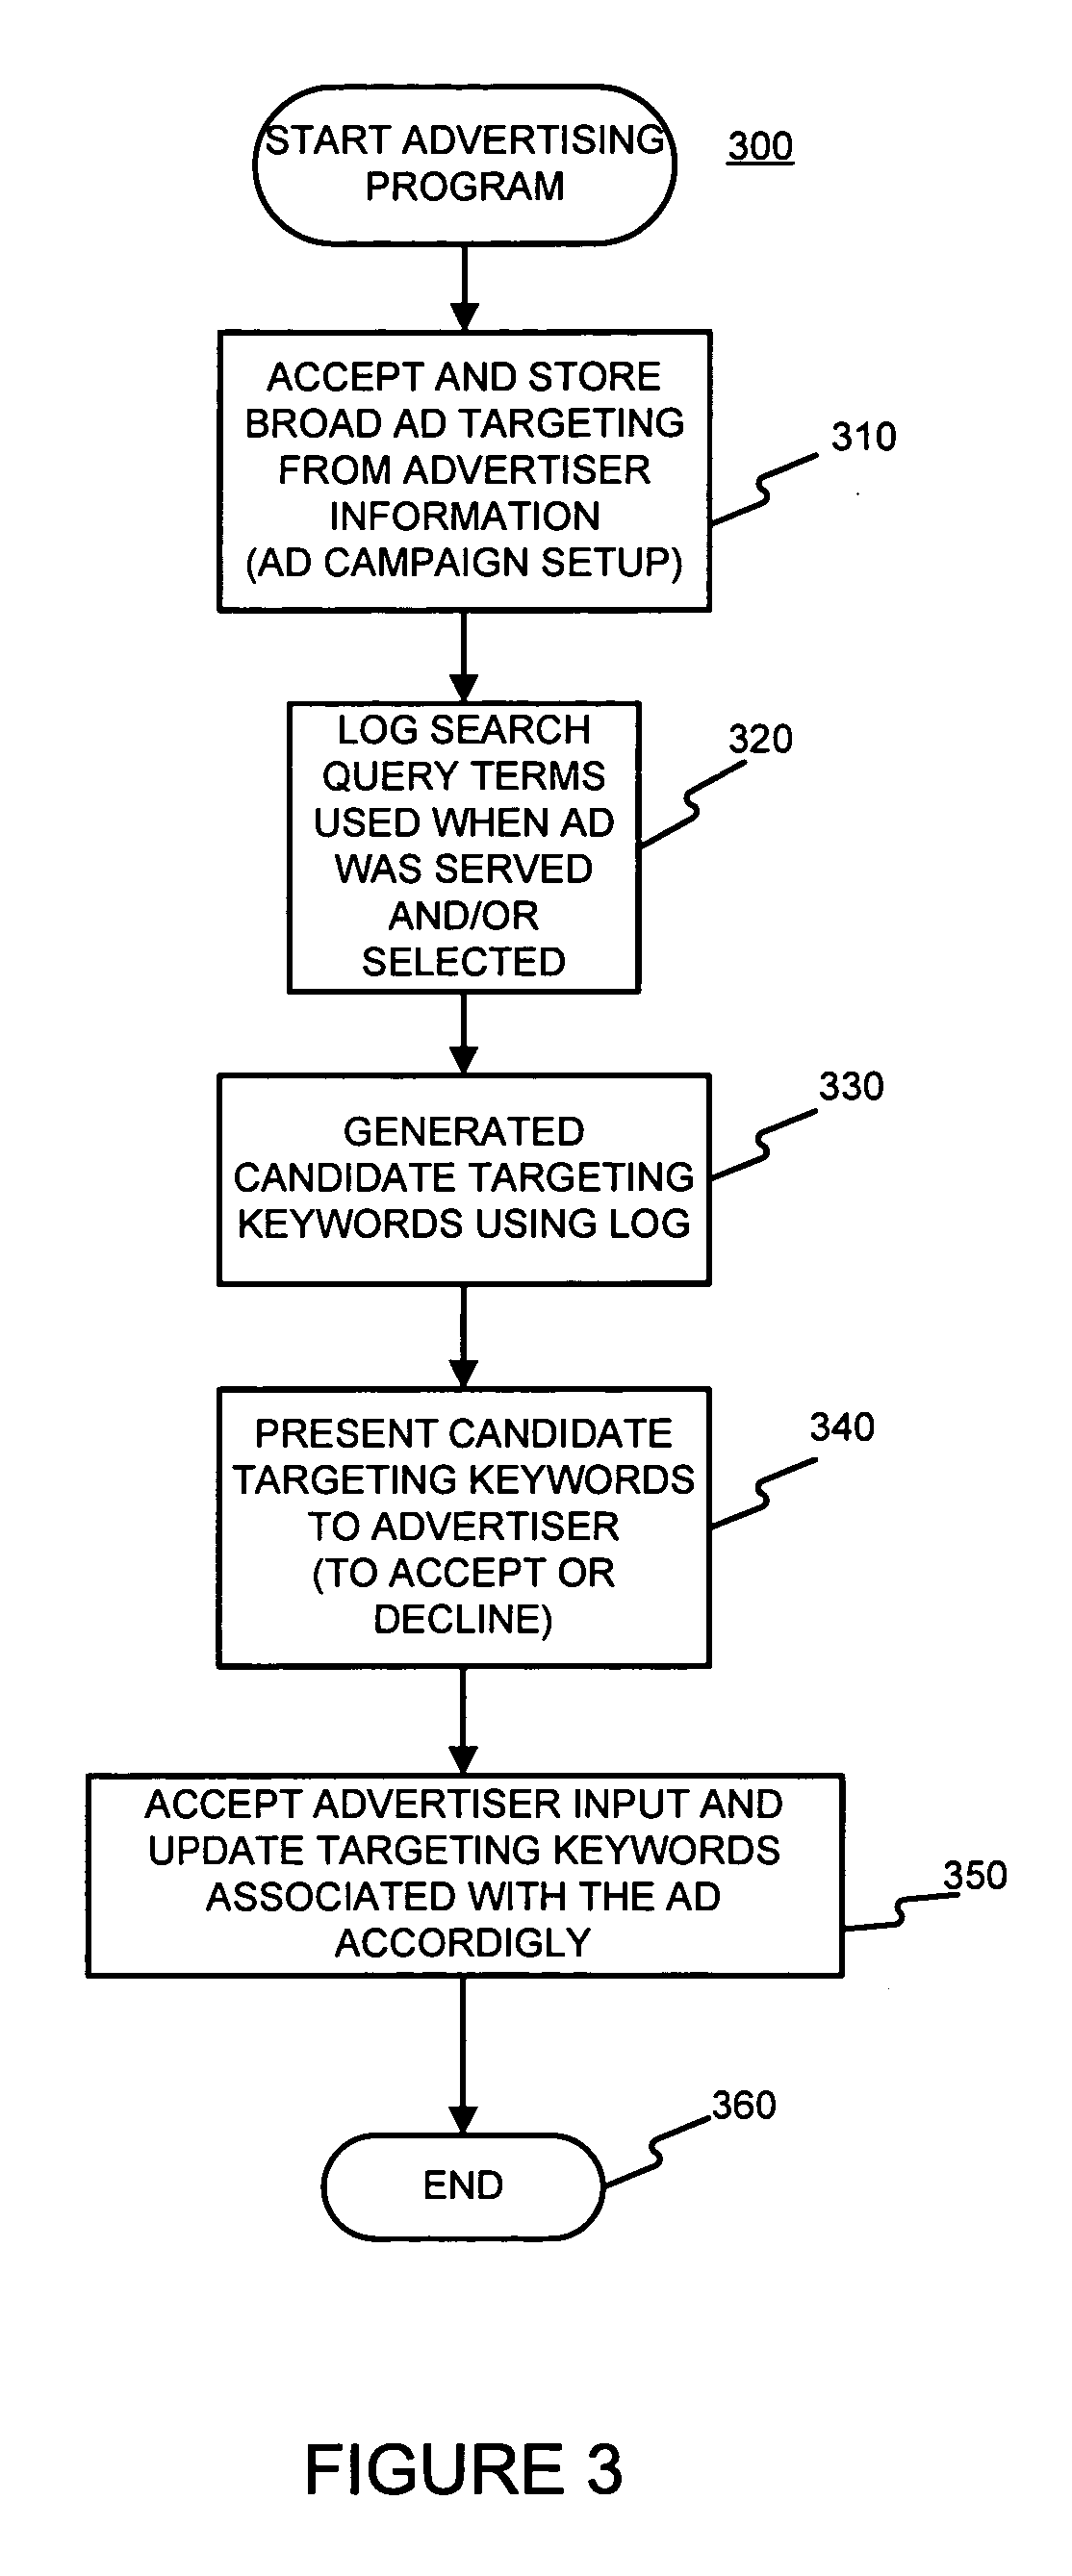 Suggesting and/or providing targeting information for advertisements